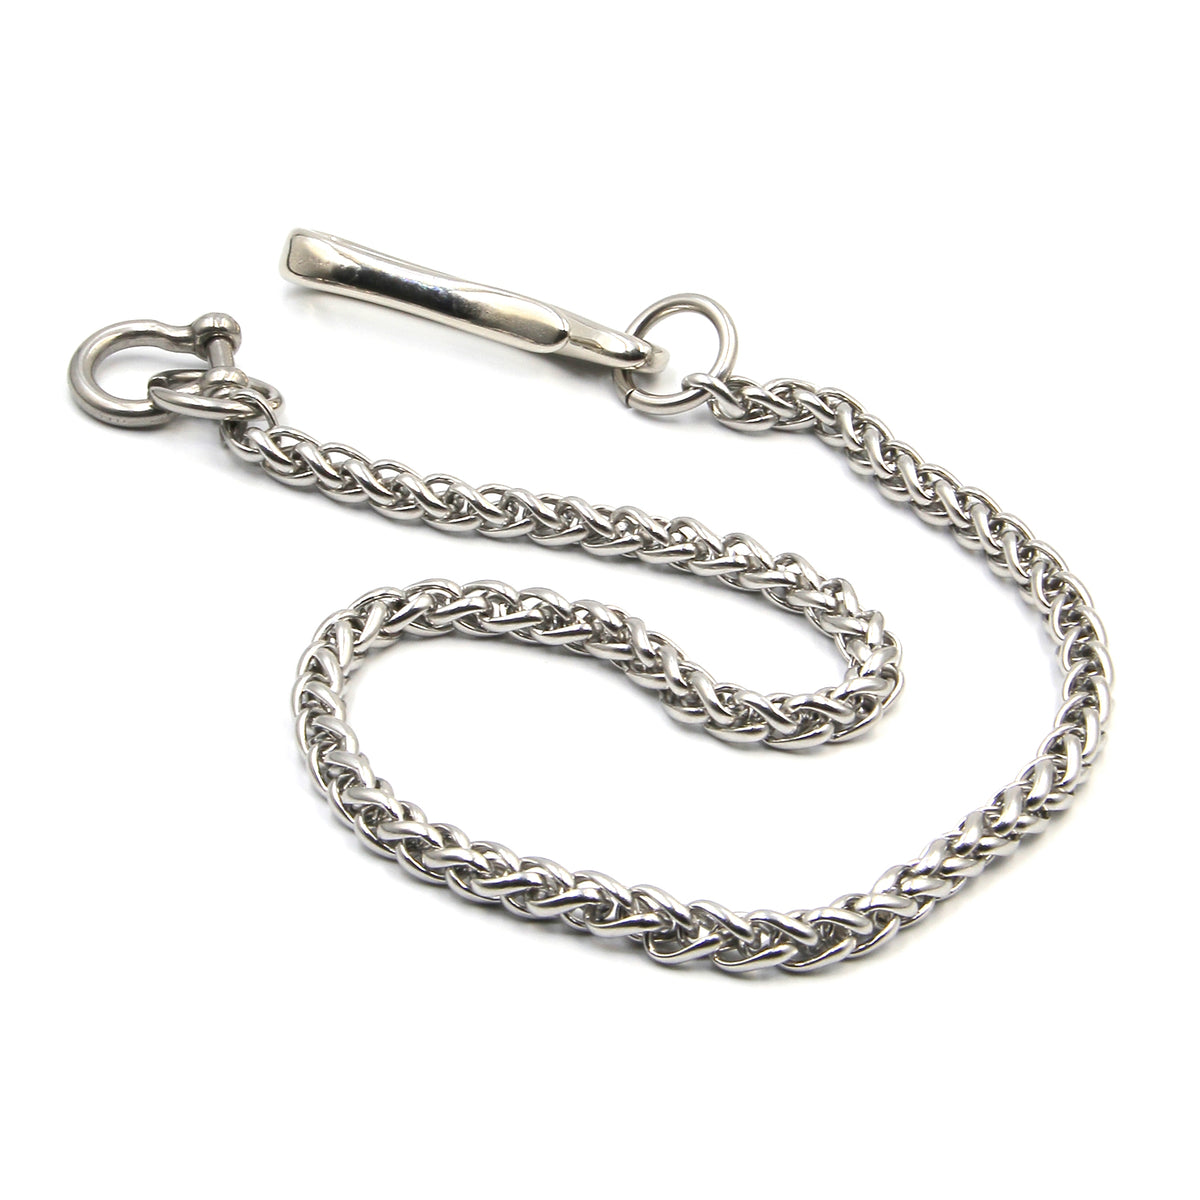 Metal Field Stainless Wheat Chain Wallet Leather Belt Key Holder Keychain Stainless Steel Purse Chain Men's Gifts 30